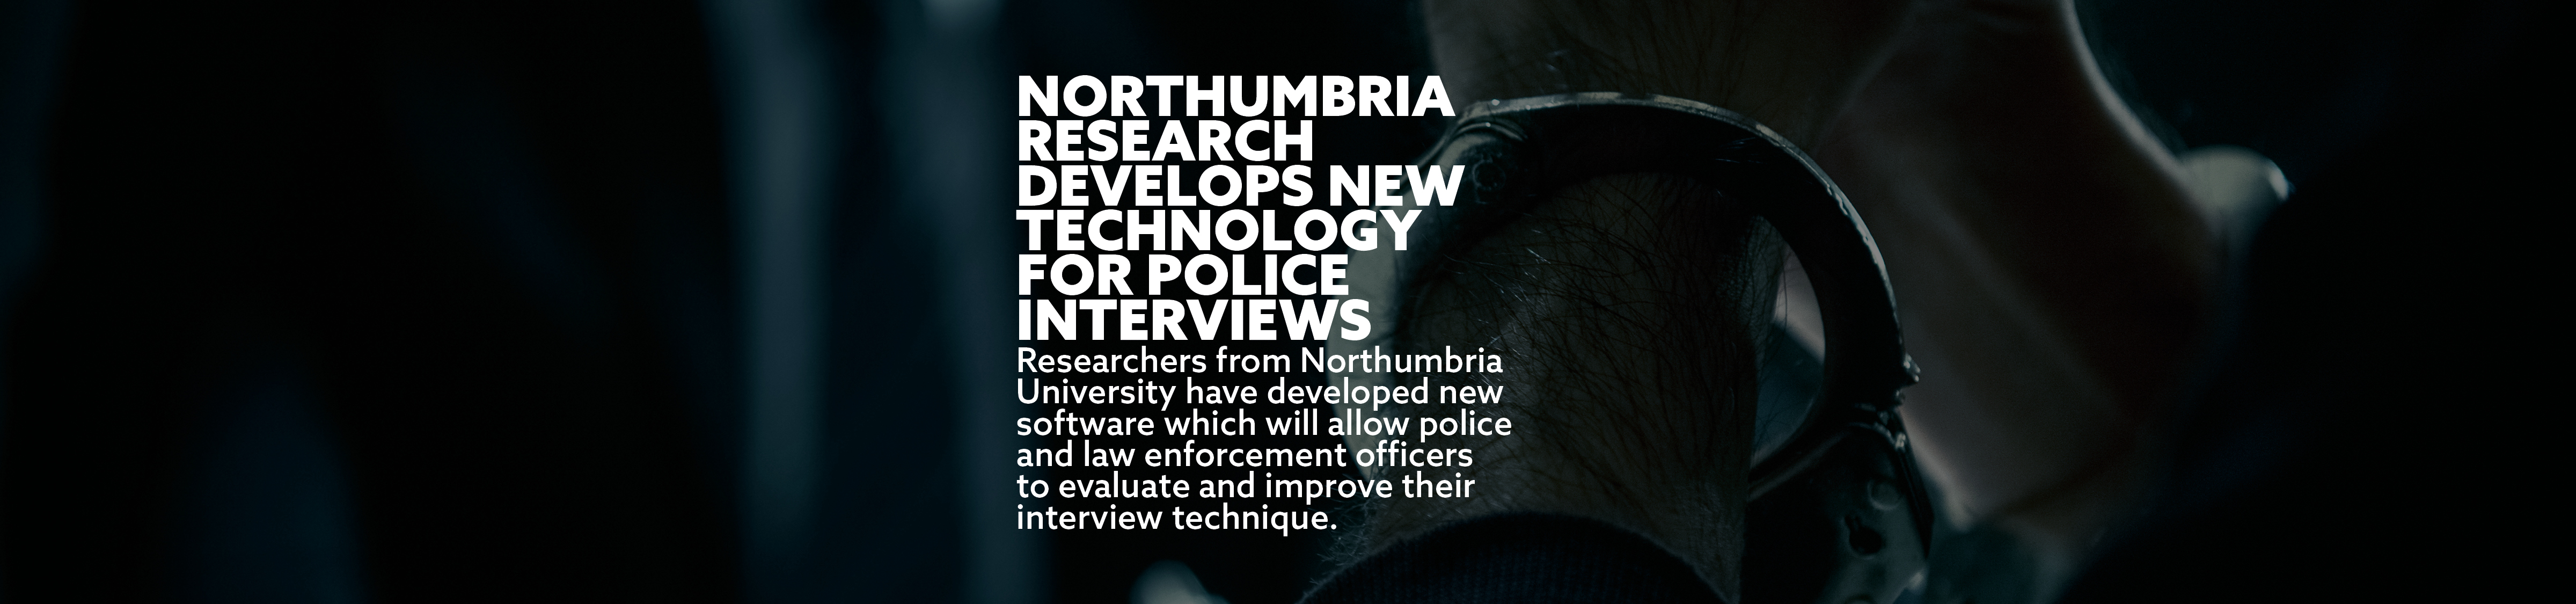 Northumbria research develops new technology for police interviews